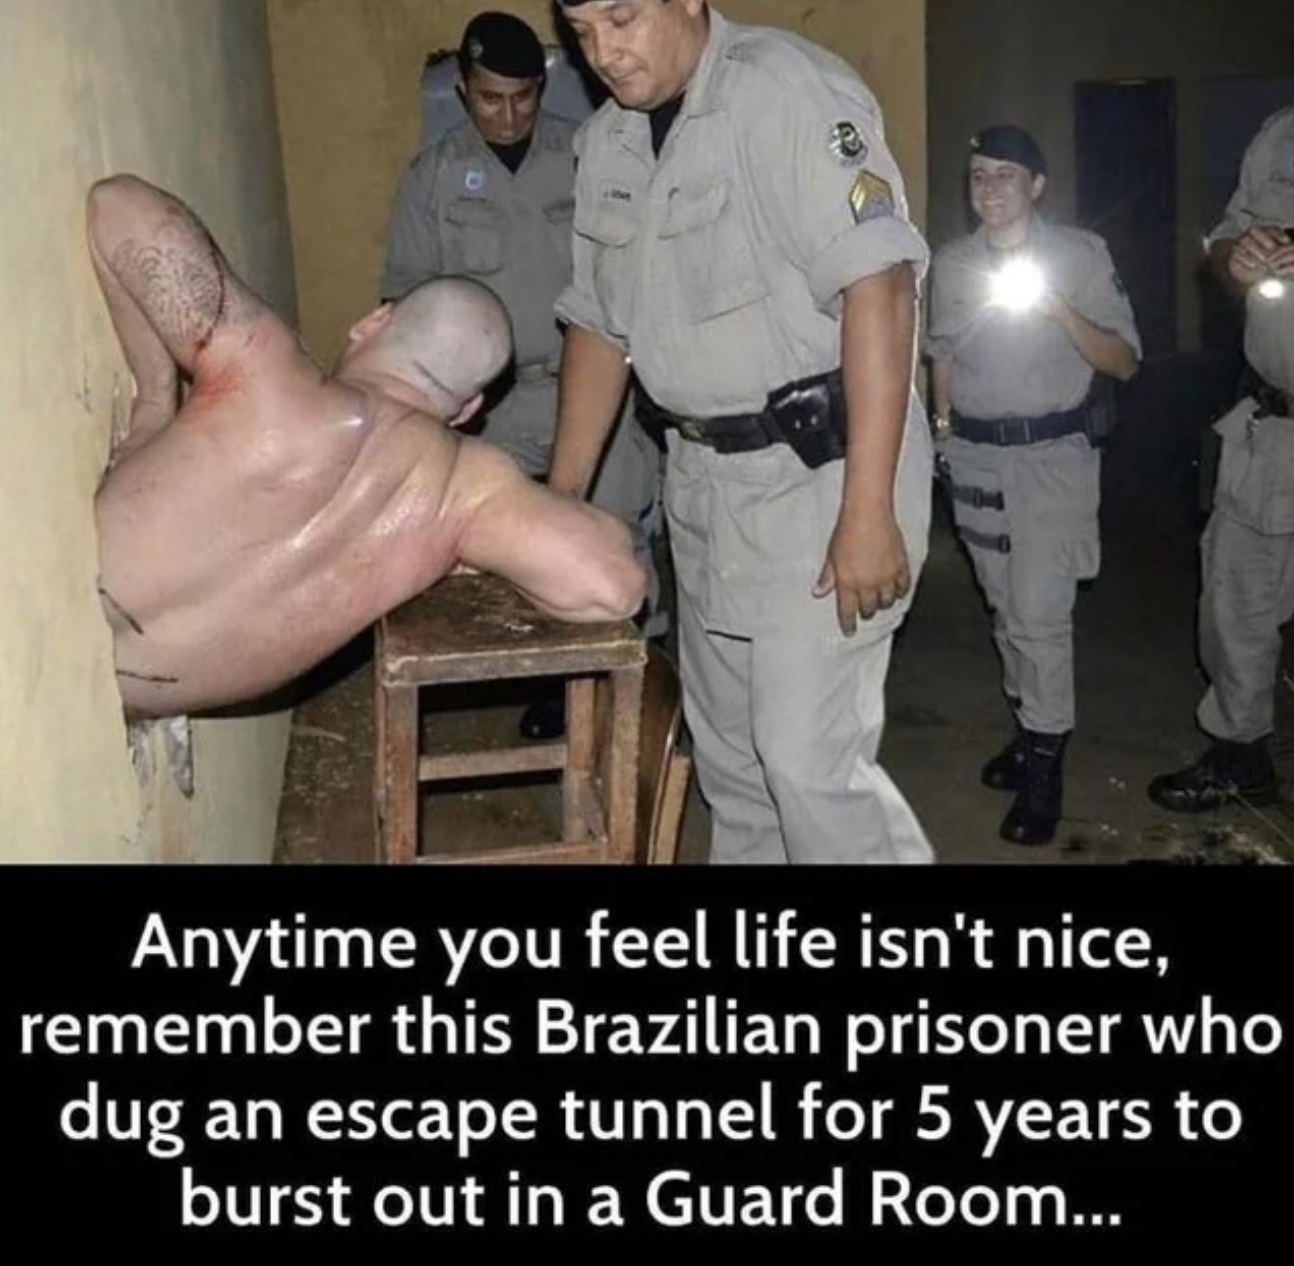 Funny Facepalms - brazilian prisoner who dug an escape for 5 years - Anytime you feel life isn't nice, remember this Brazilian prisoner who dug an escape tunnel for 5 years to burst out in a Guard Room...